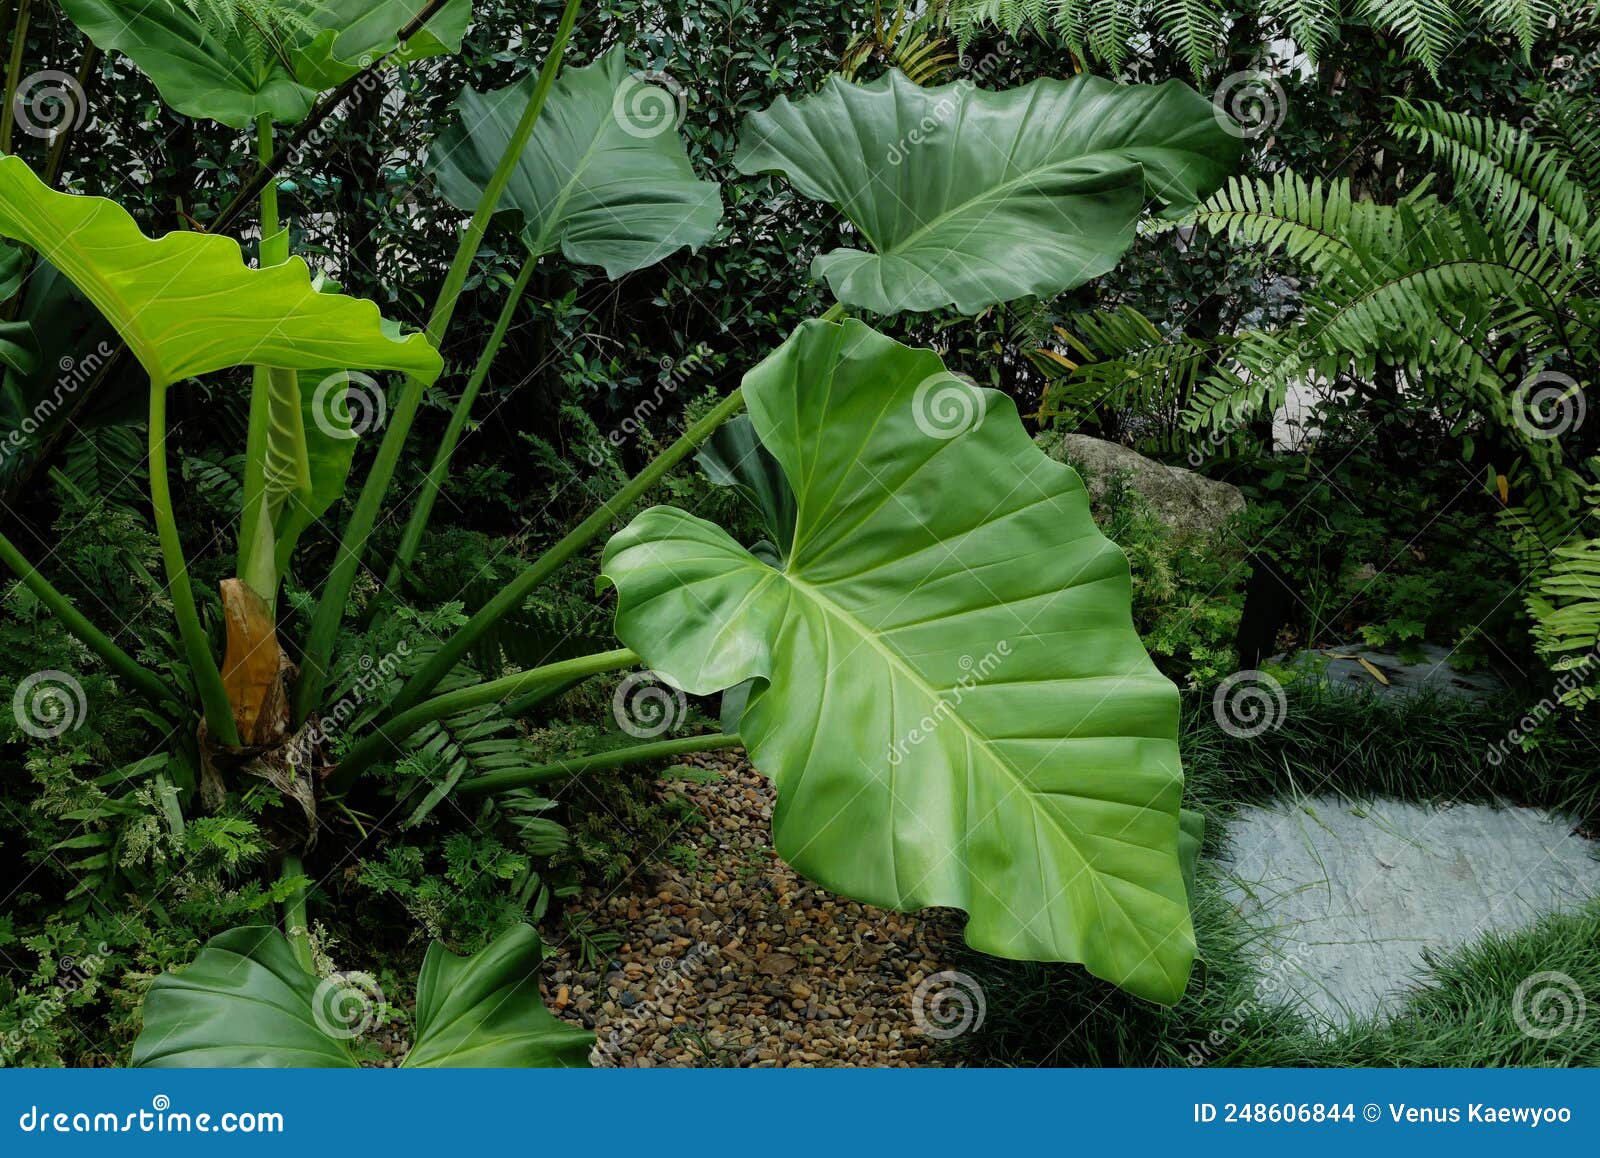 tropical green leaves philodendron heartleaf plant  in garden background